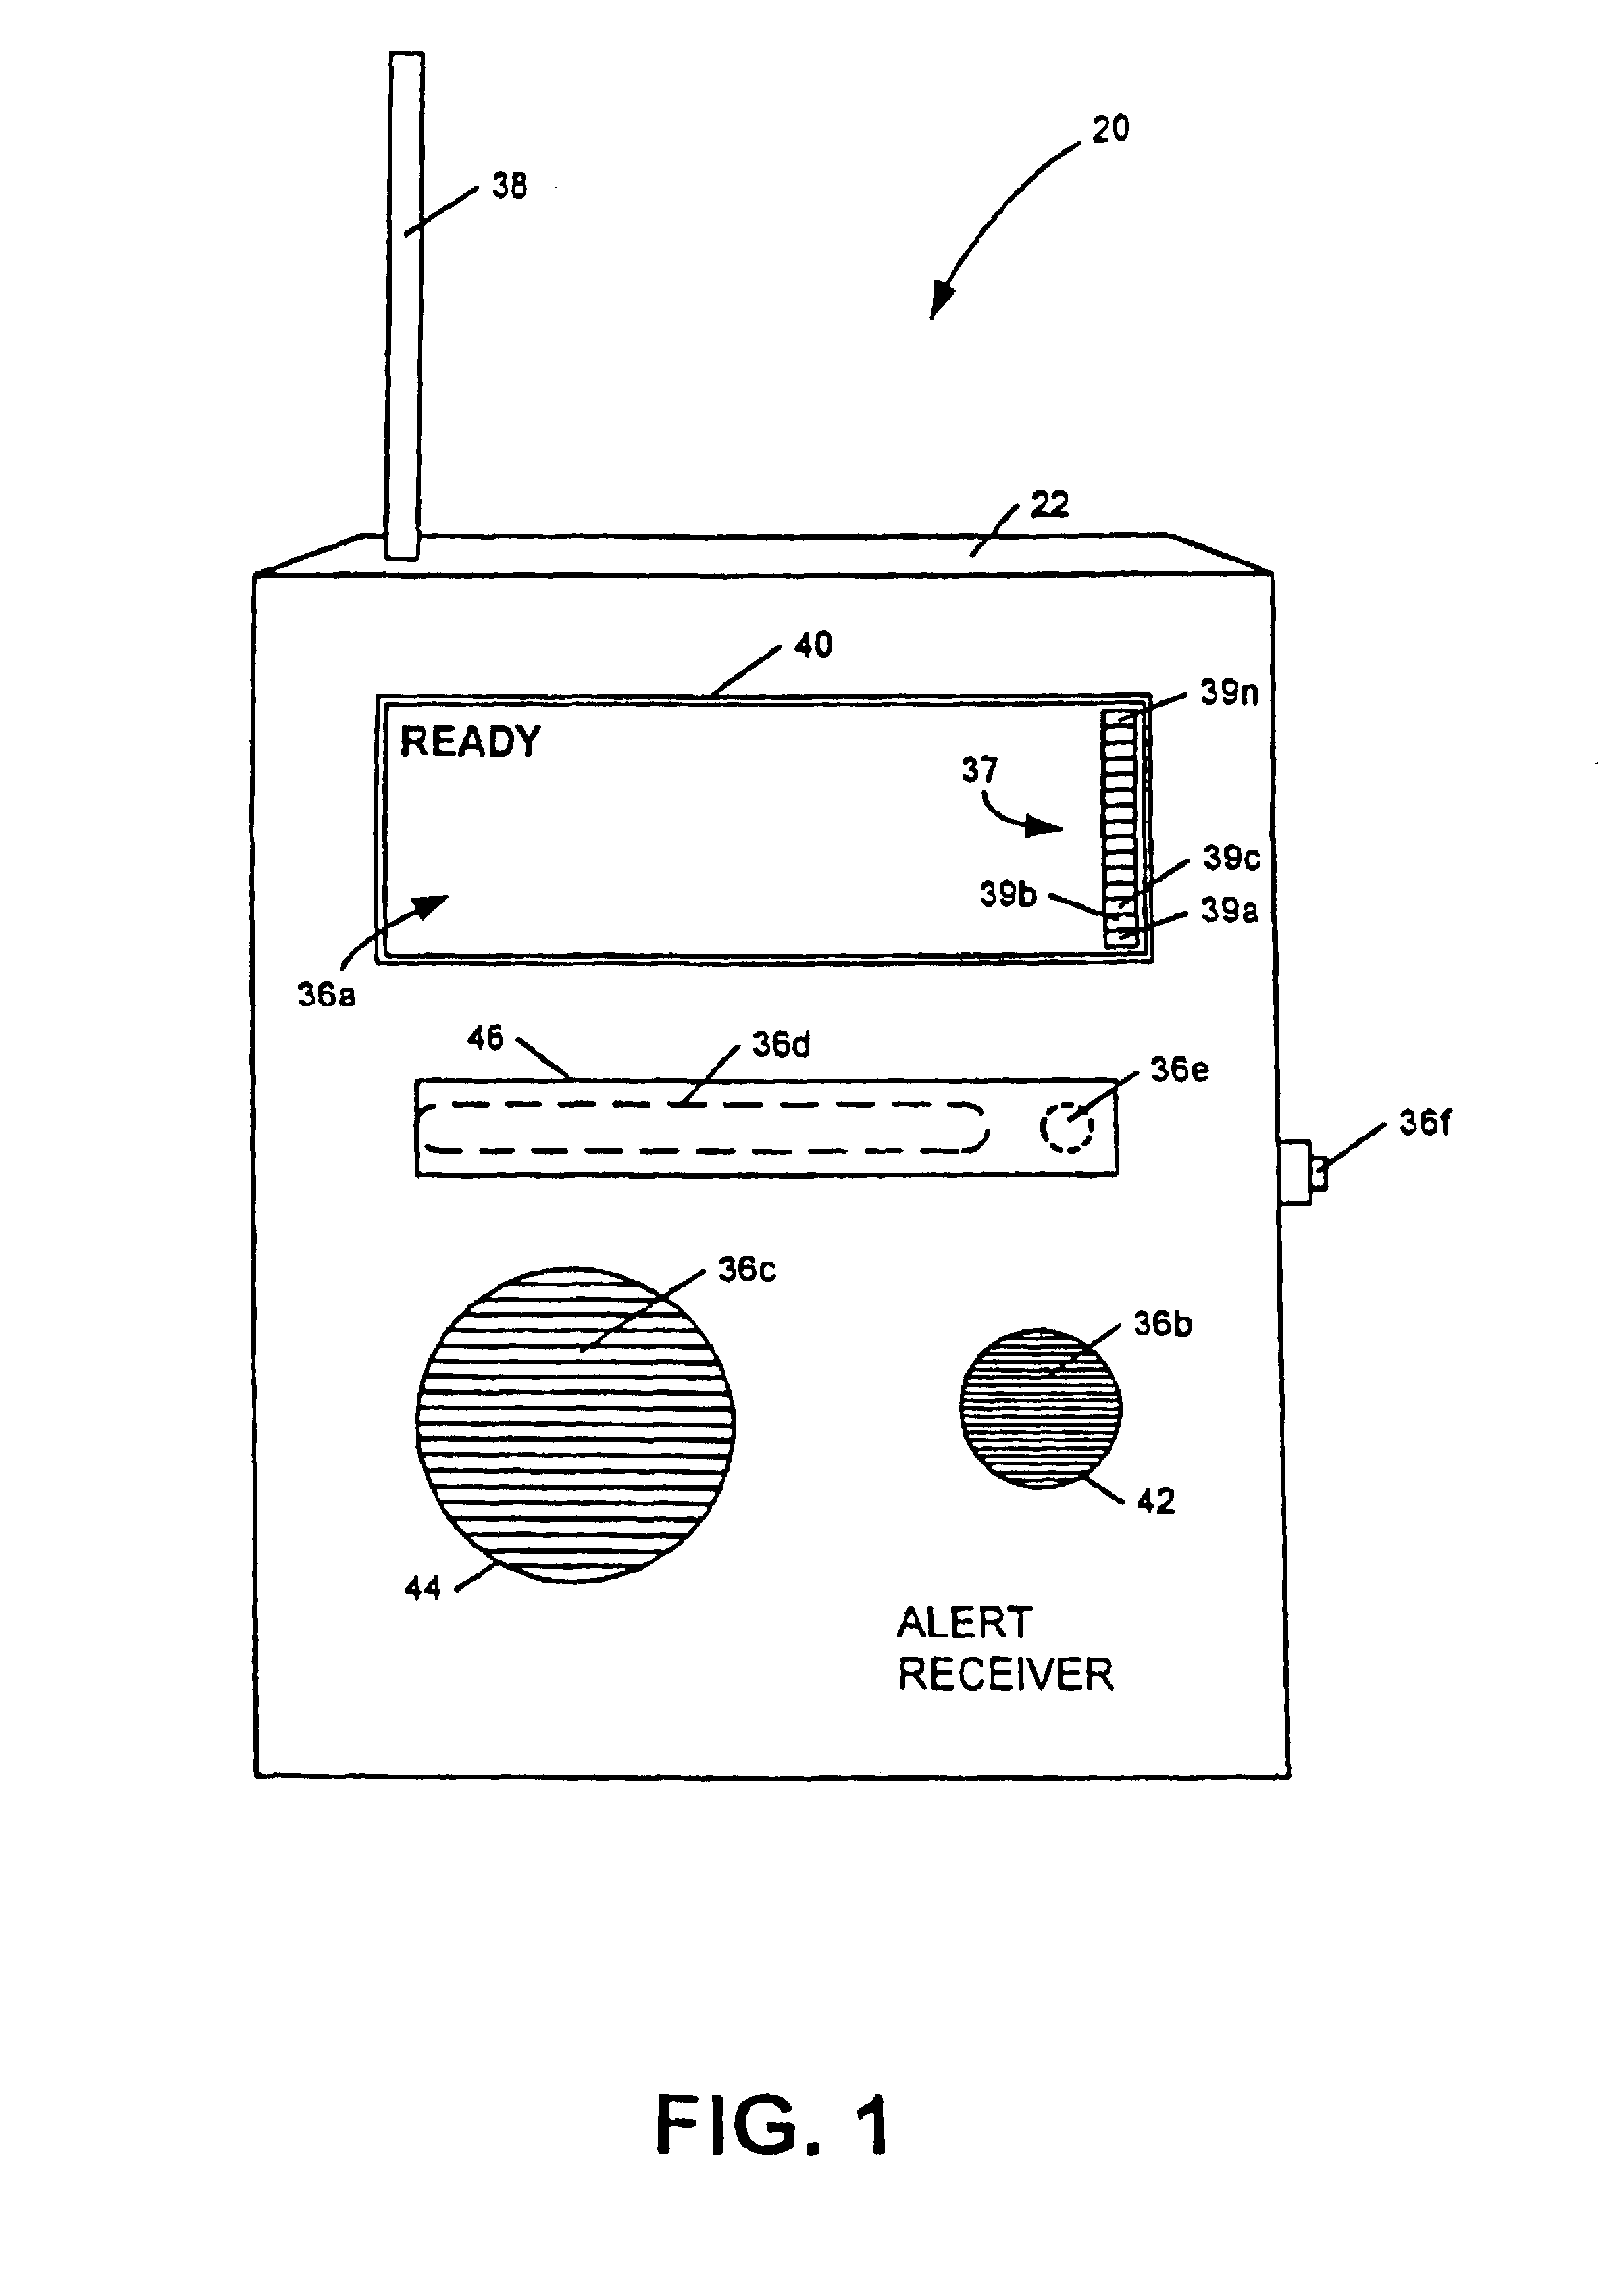 Apparatus and method for providing weather and other alerts